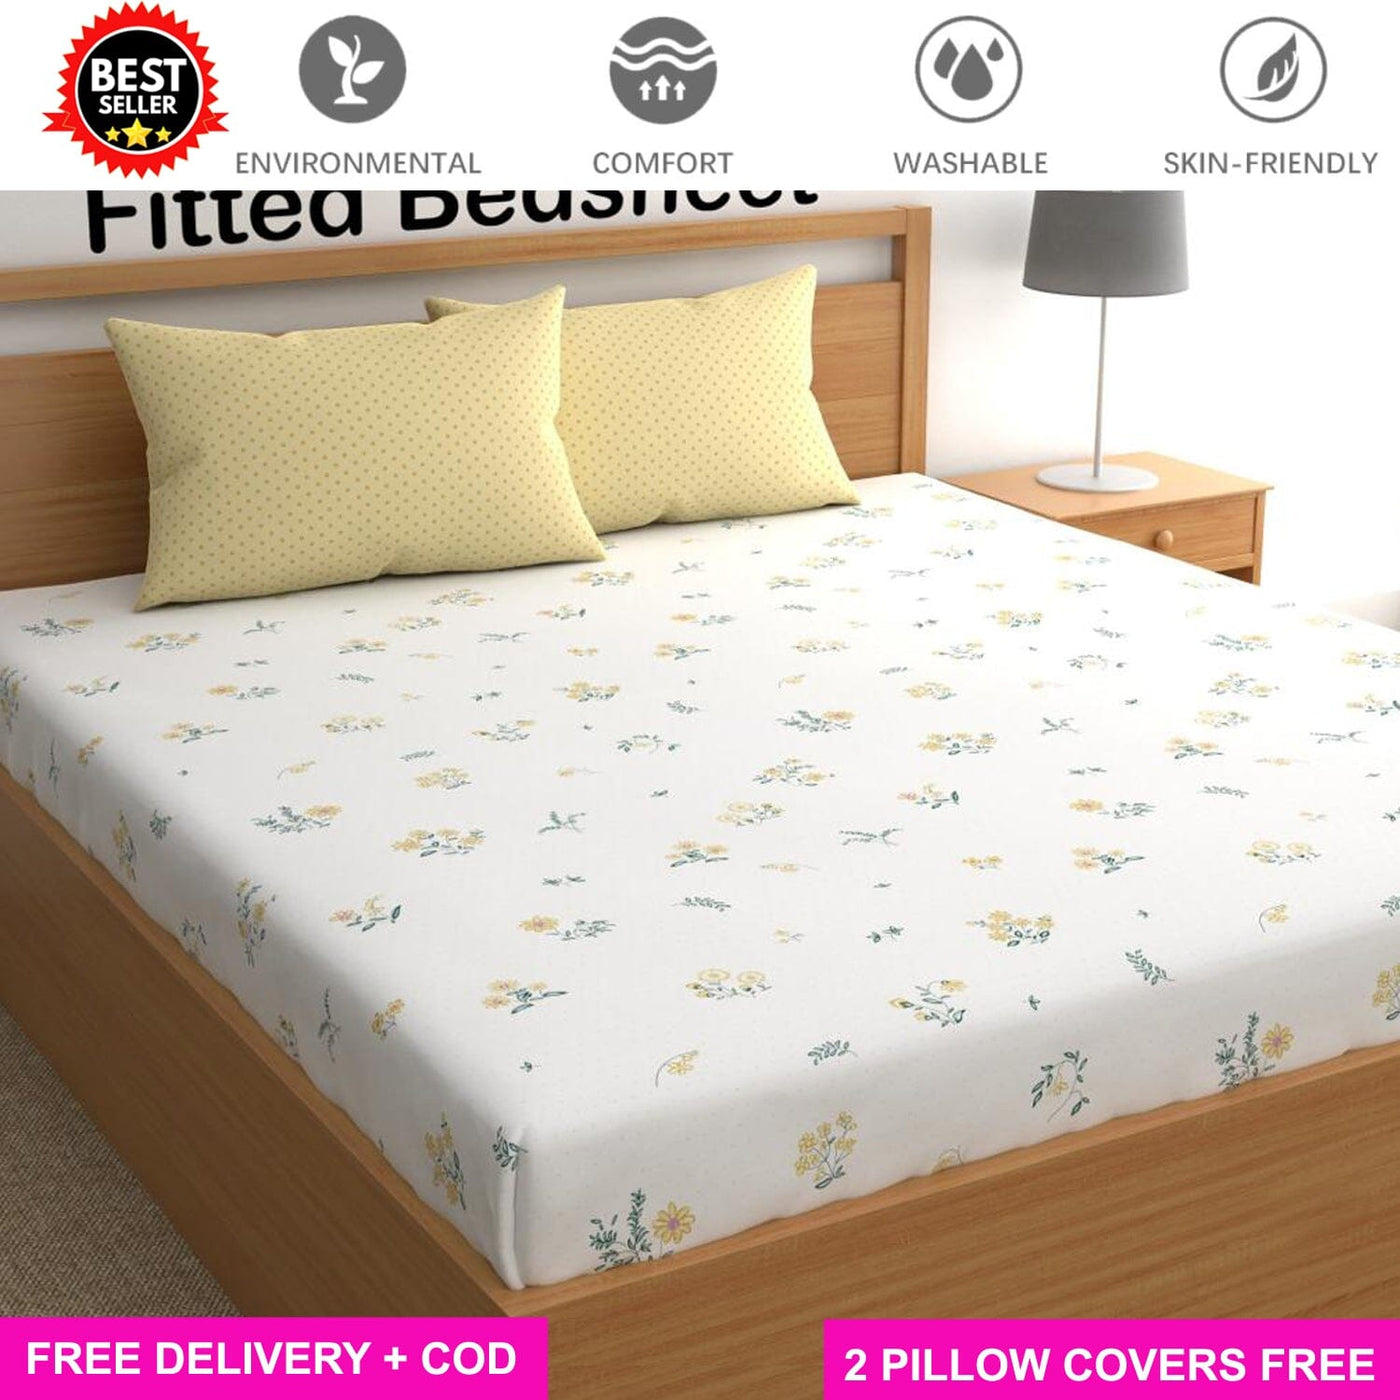 Butterscotch Contrast Full Elastic Fitted Bedsheet with 2 Pillow Covers - King Size Bed Sheets Great Happy IN 